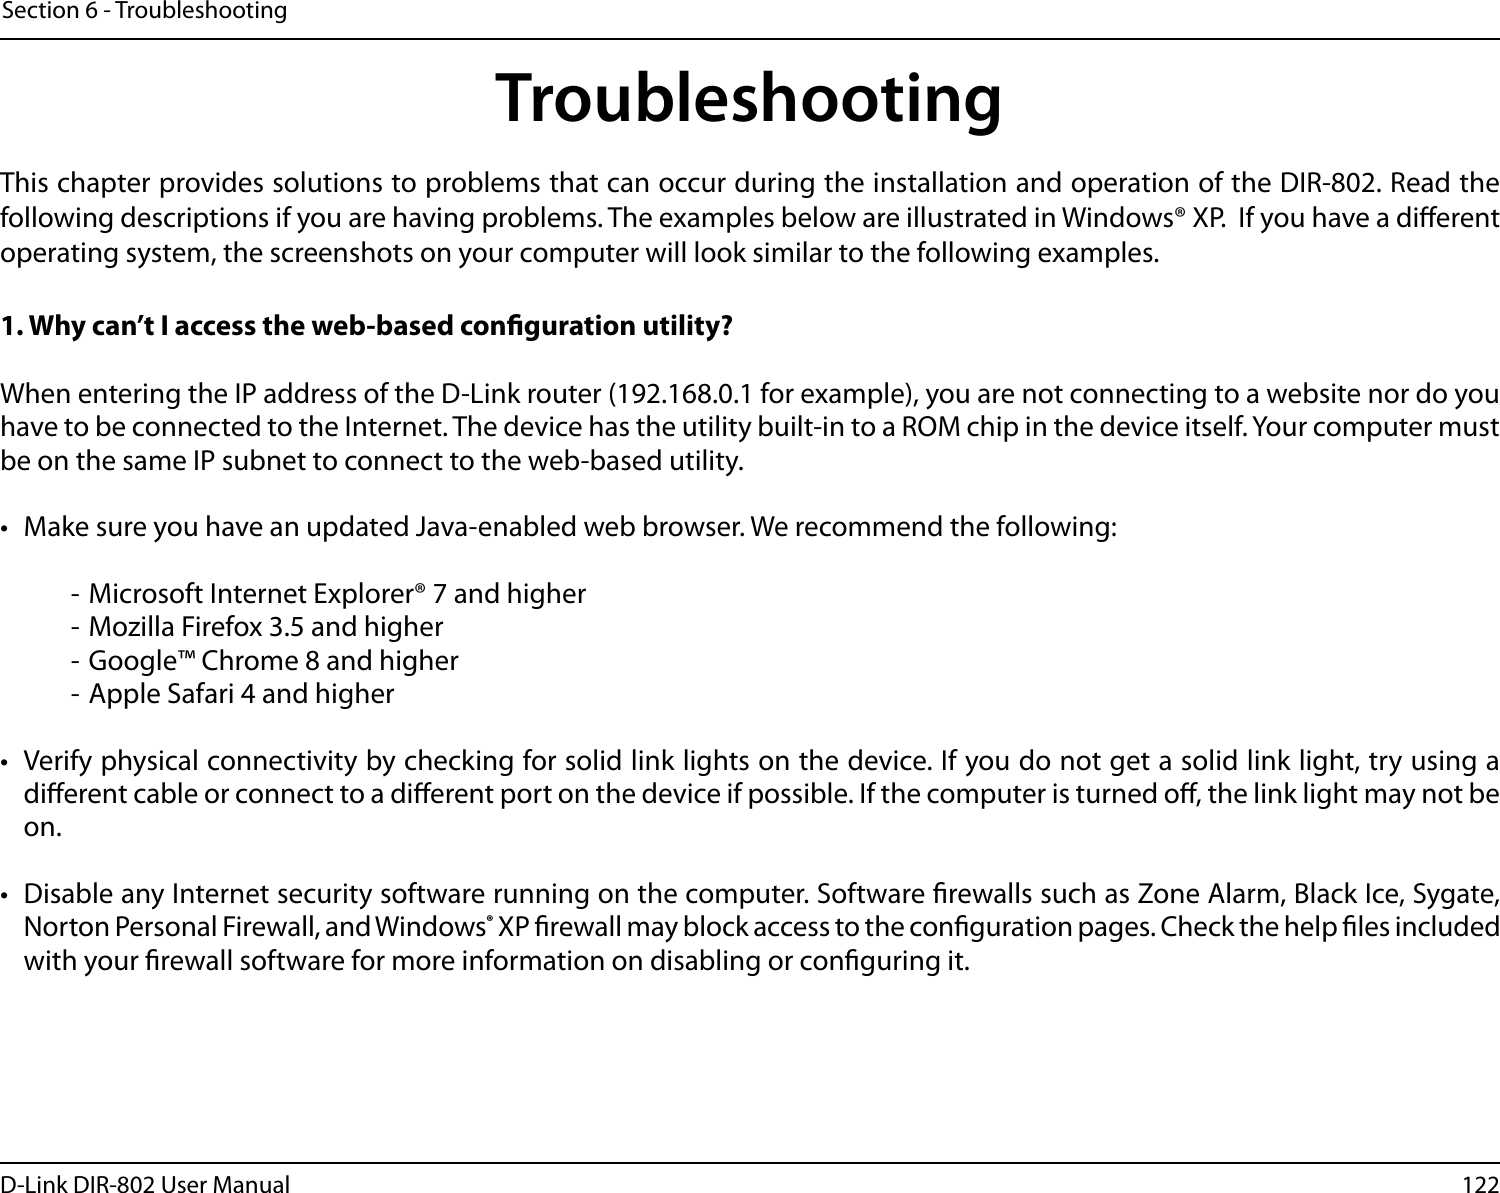 122D-Link DIR-802 User ManualSection 6 - TroubleshootingTroubleshootingThis chapter provides solutions to problems that can occur during the installation and operation of the DIR-802. Read the following descriptions if you are having problems. The examples below are illustrated in Windows® XP.  If you have a dierent operating system, the screenshots on your computer will look similar to the following examples.1. Why can’t I access the web-based conguration utility?When entering the IP address of the D-Link router (192.168.0.1 for example), you are not connecting to a website nor do you have to be connected to the Internet. The device has the utility built-in to a ROM chip in the device itself. Your computer must be on the same IP subnet to connect to the web-based utility. •  Make sure you have an updated Java-enabled web browser. We recommend the following:  - Microsoft Internet Explorer® 7 and higher- Mozilla Firefox 3.5 and higher- Google™ Chrome 8 and higher- Apple Safari 4 and higher•  Verify physical connectivity by checking for solid link lights on the device. If you do not get a solid link light, try using a dierent cable or connect to a dierent port on the device if possible. If the computer is turned o, the link light may not be on.•  Disable any Internet security software running on the computer. Software rewalls such as Zone Alarm, Black Ice, Sygate, Norton Personal Firewall, and Windows® XP rewall may block access to the conguration pages. Check the help les included with your rewall software for more information on disabling or conguring it.